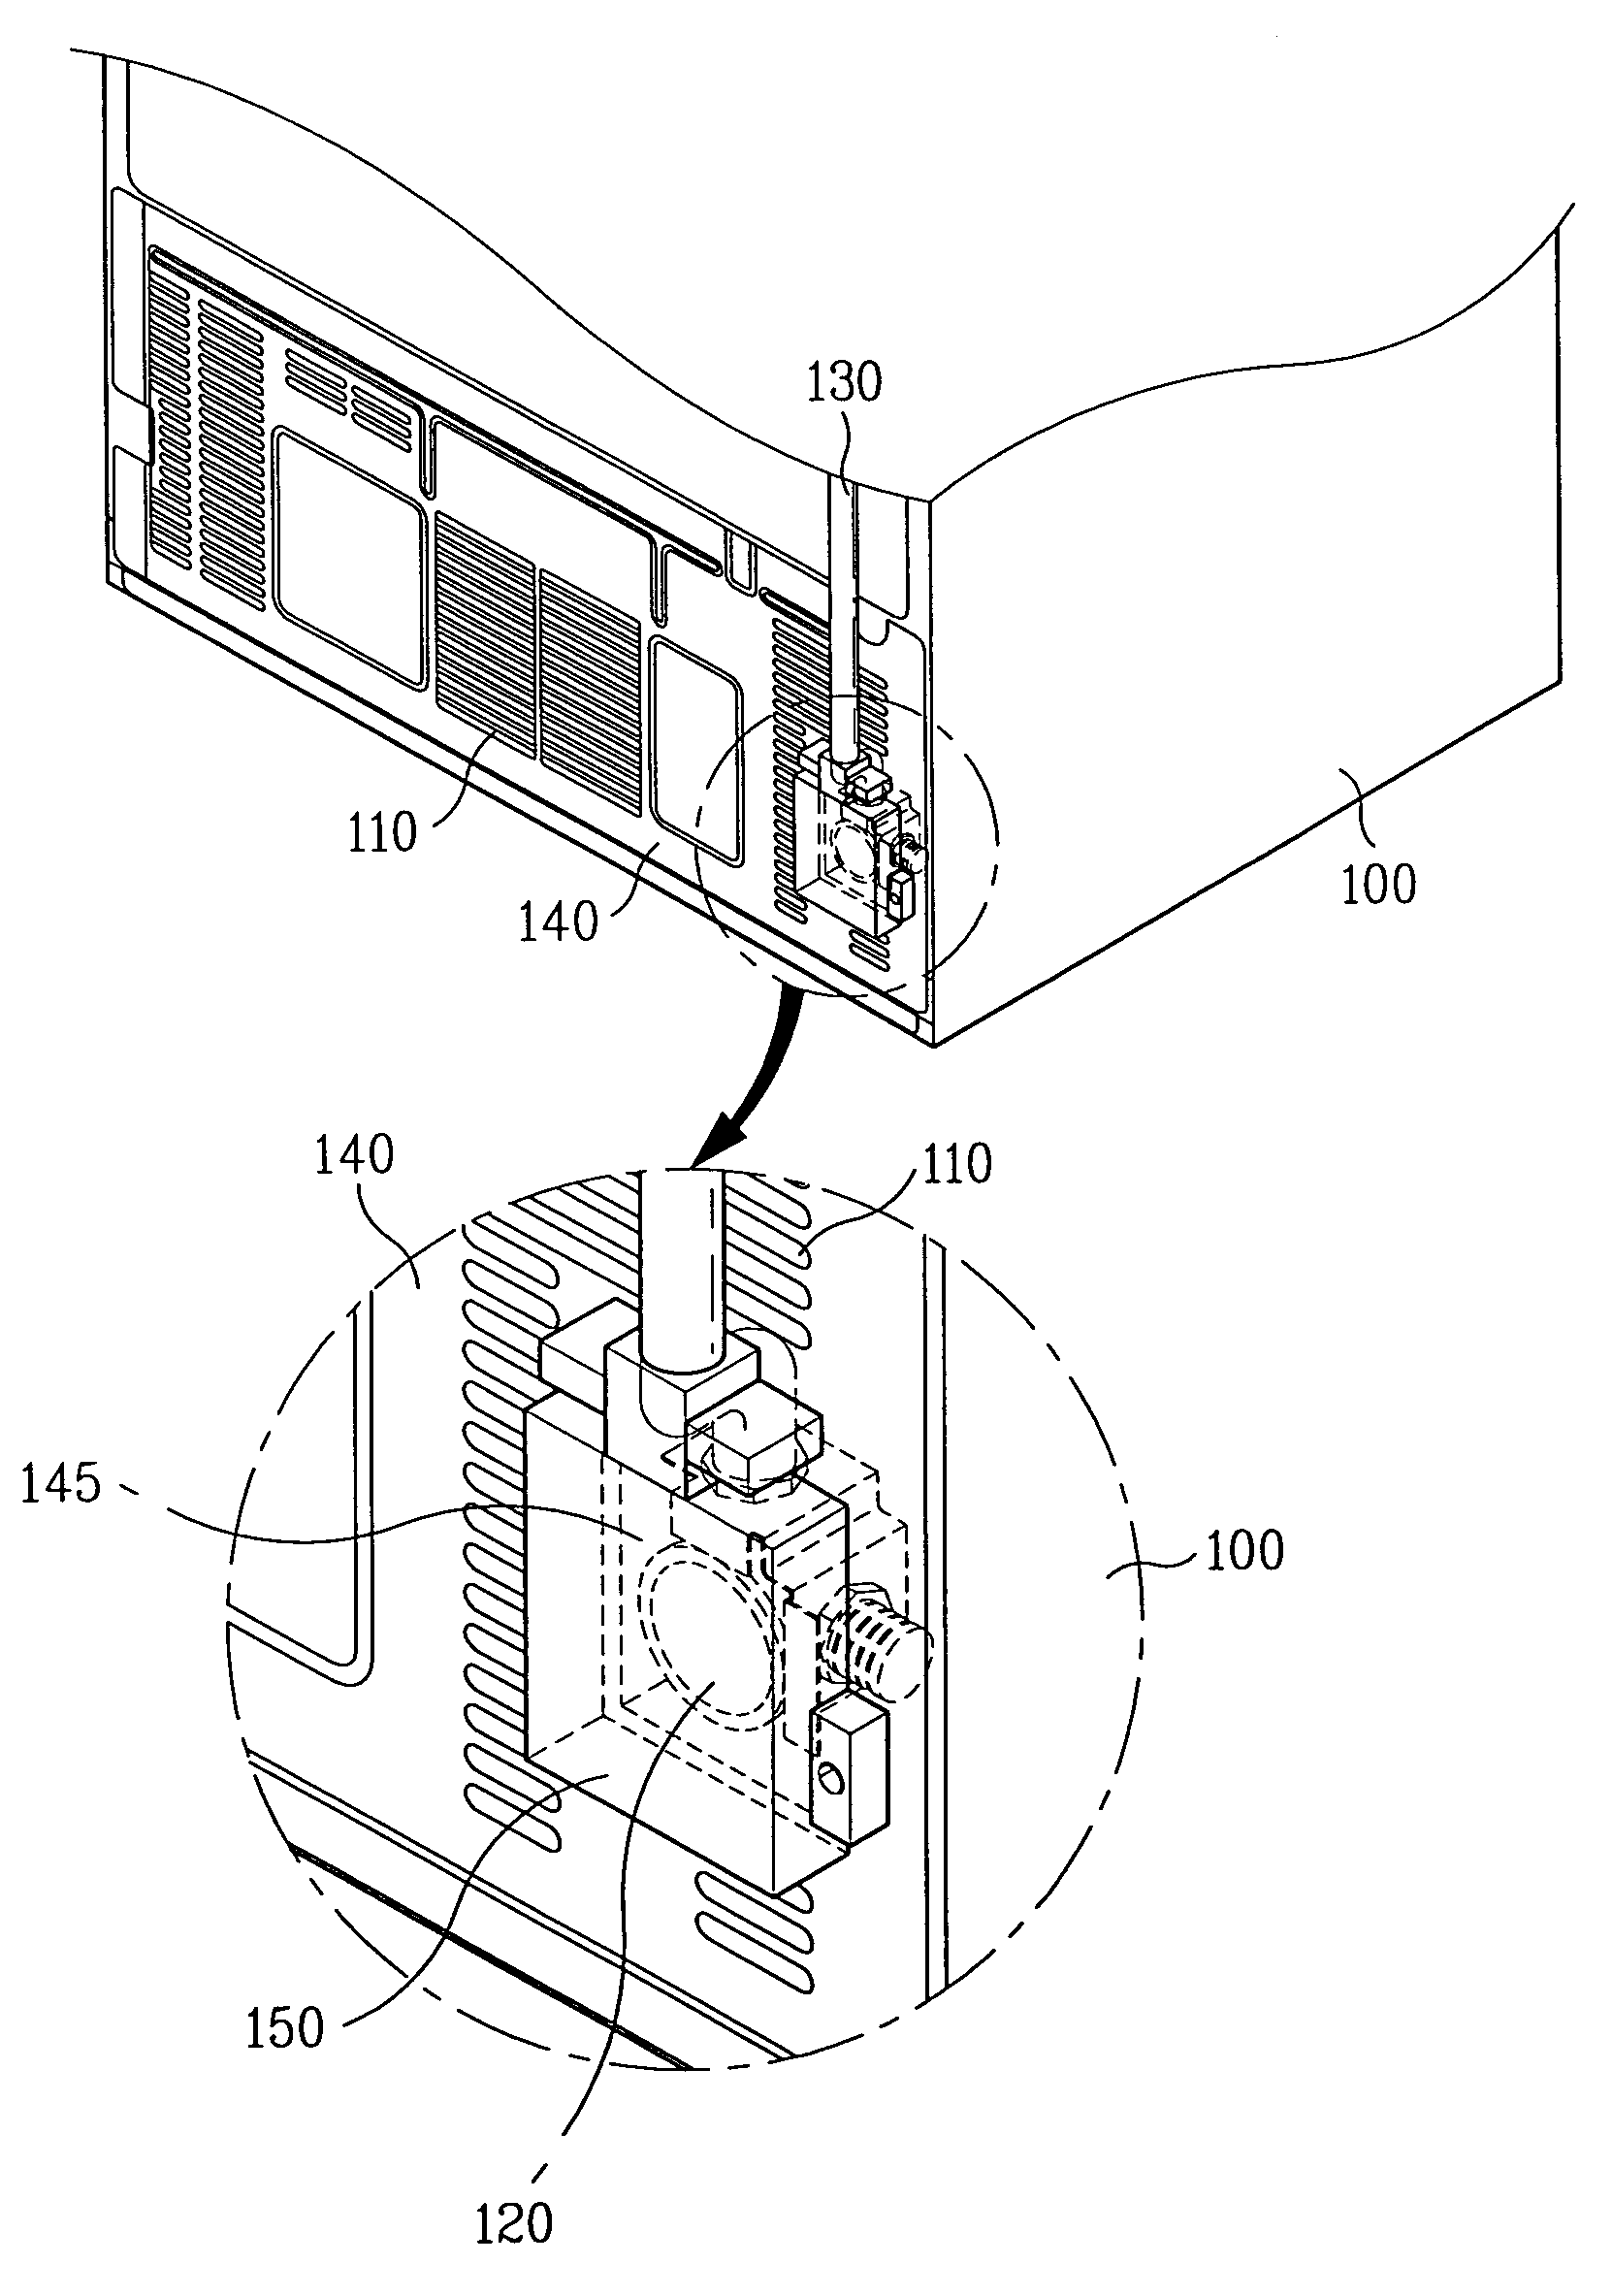 Cover assembly of machinery chamber in refrigerator